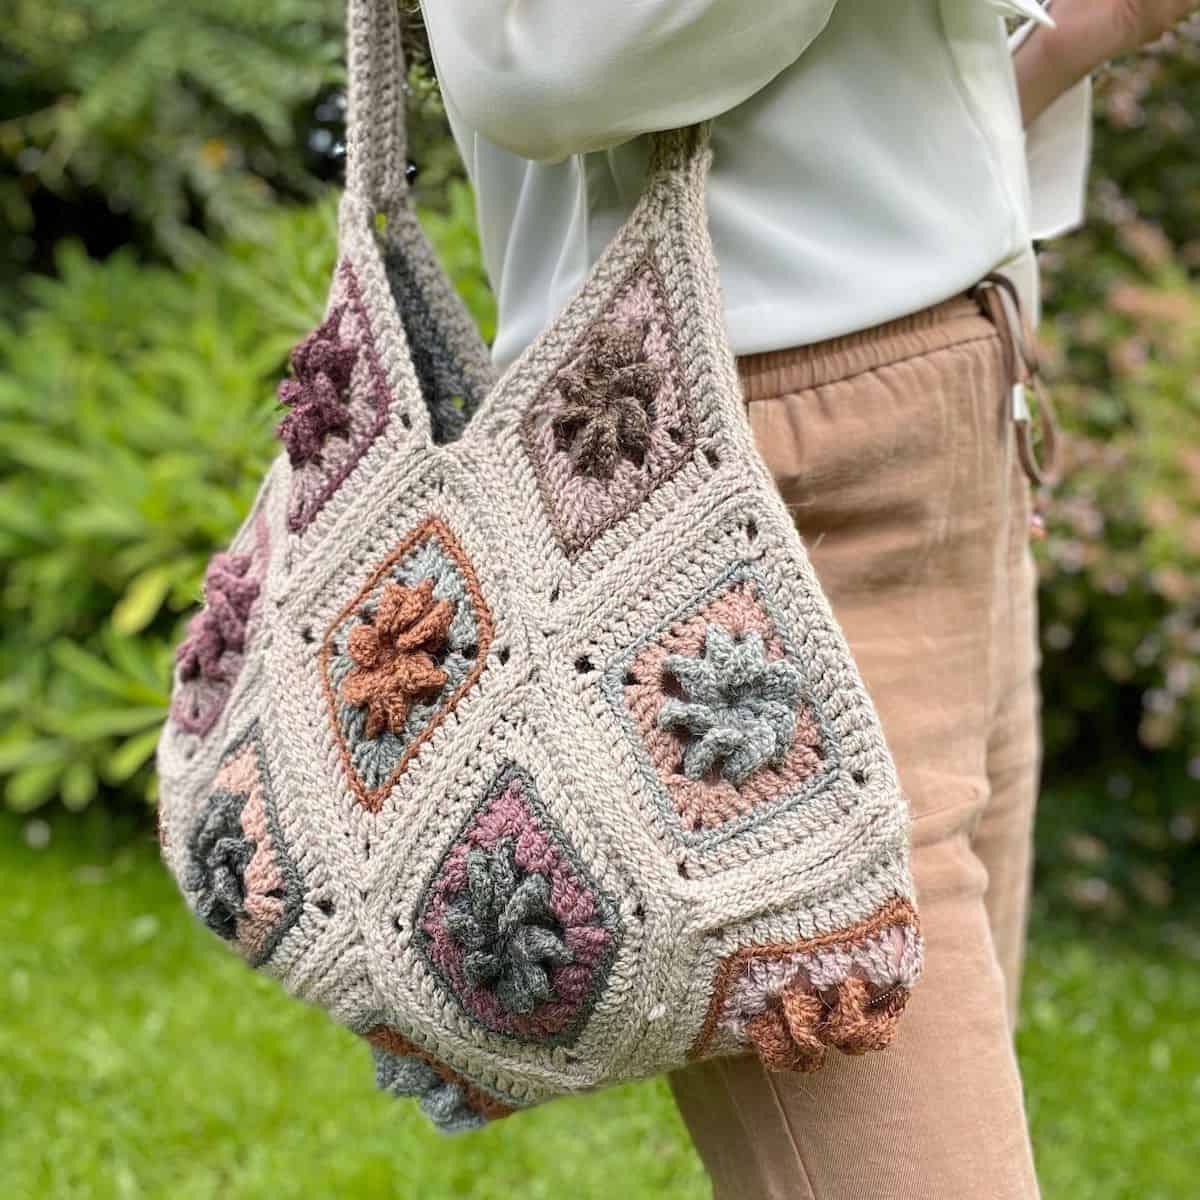 A woman is holding a crocheted bag in the grass.